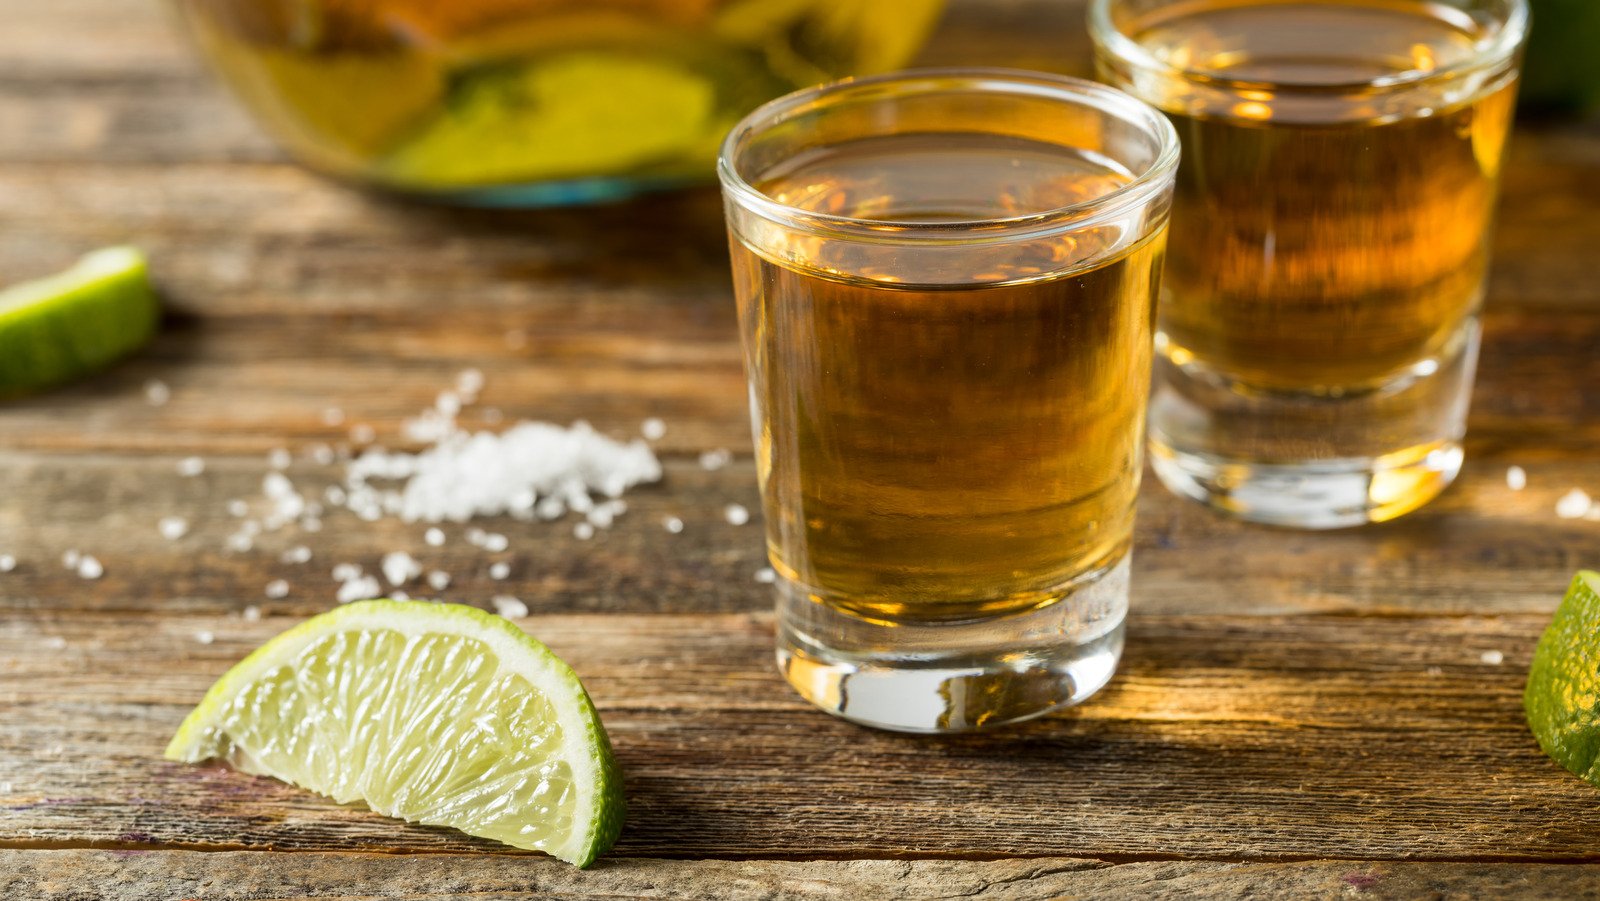 You Should Try Adding Tequila To Your BBQ Sauce. Here's Why